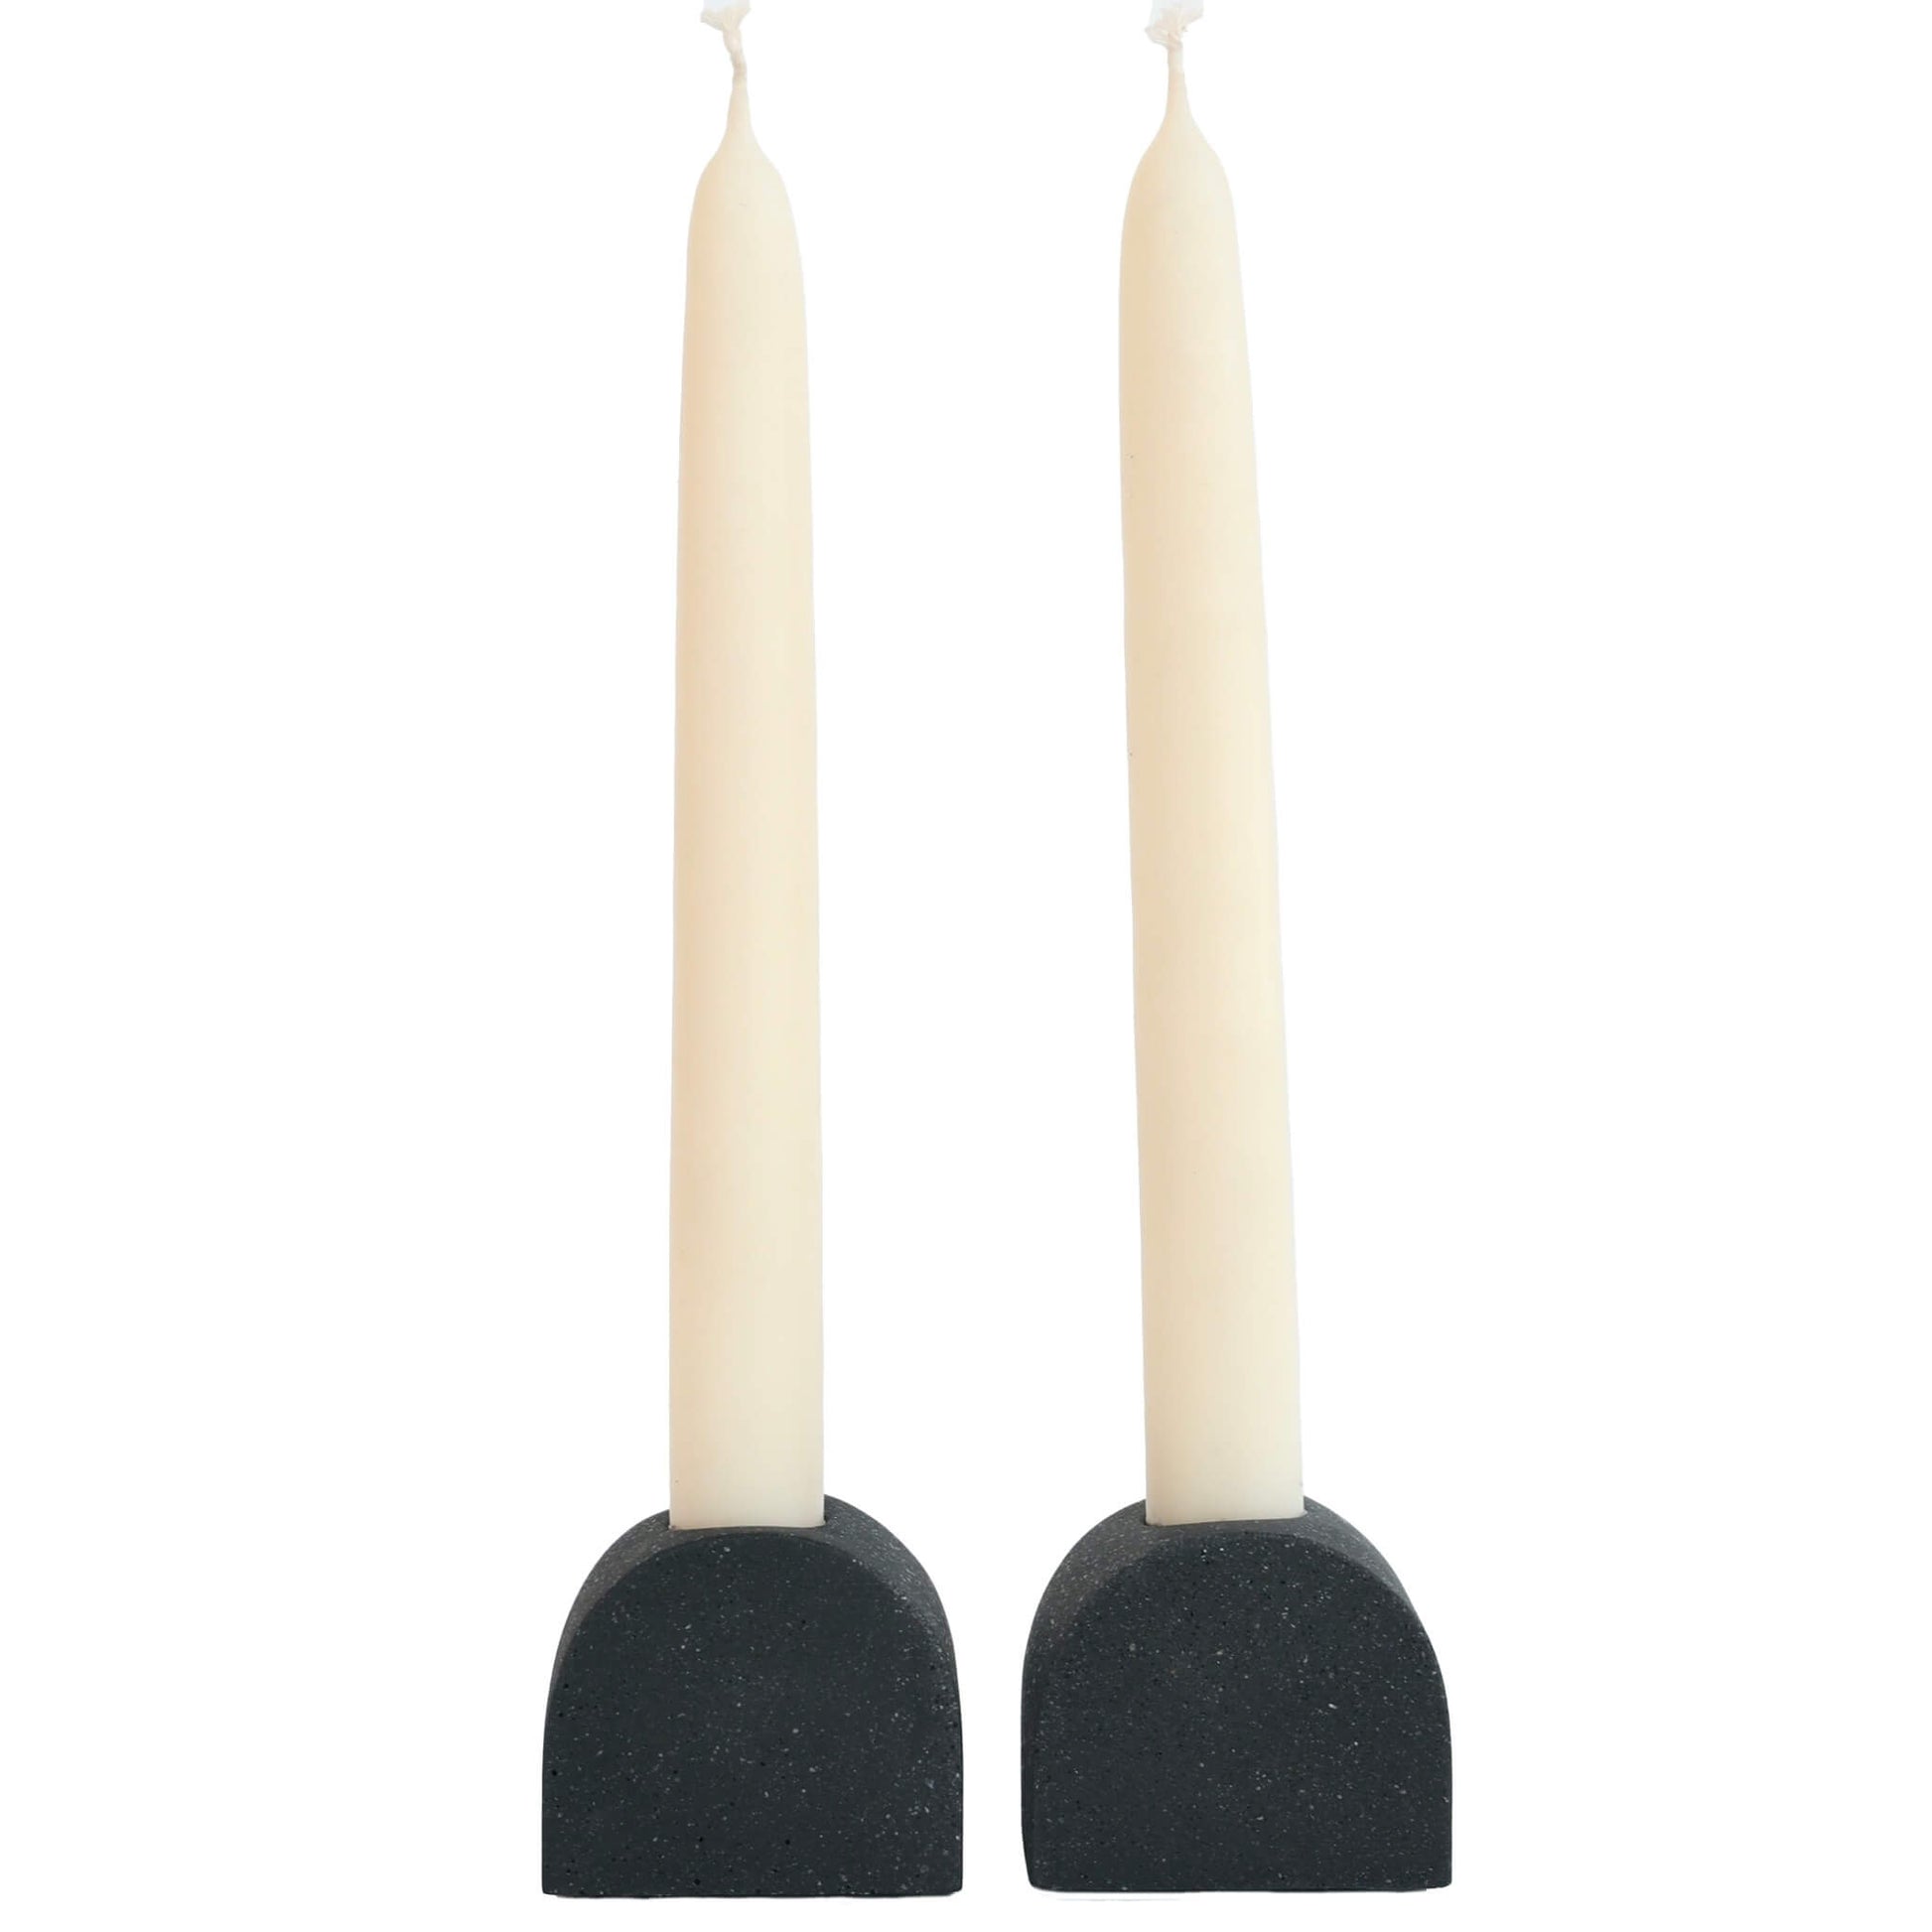 Black Small Arch Candlestick Holder